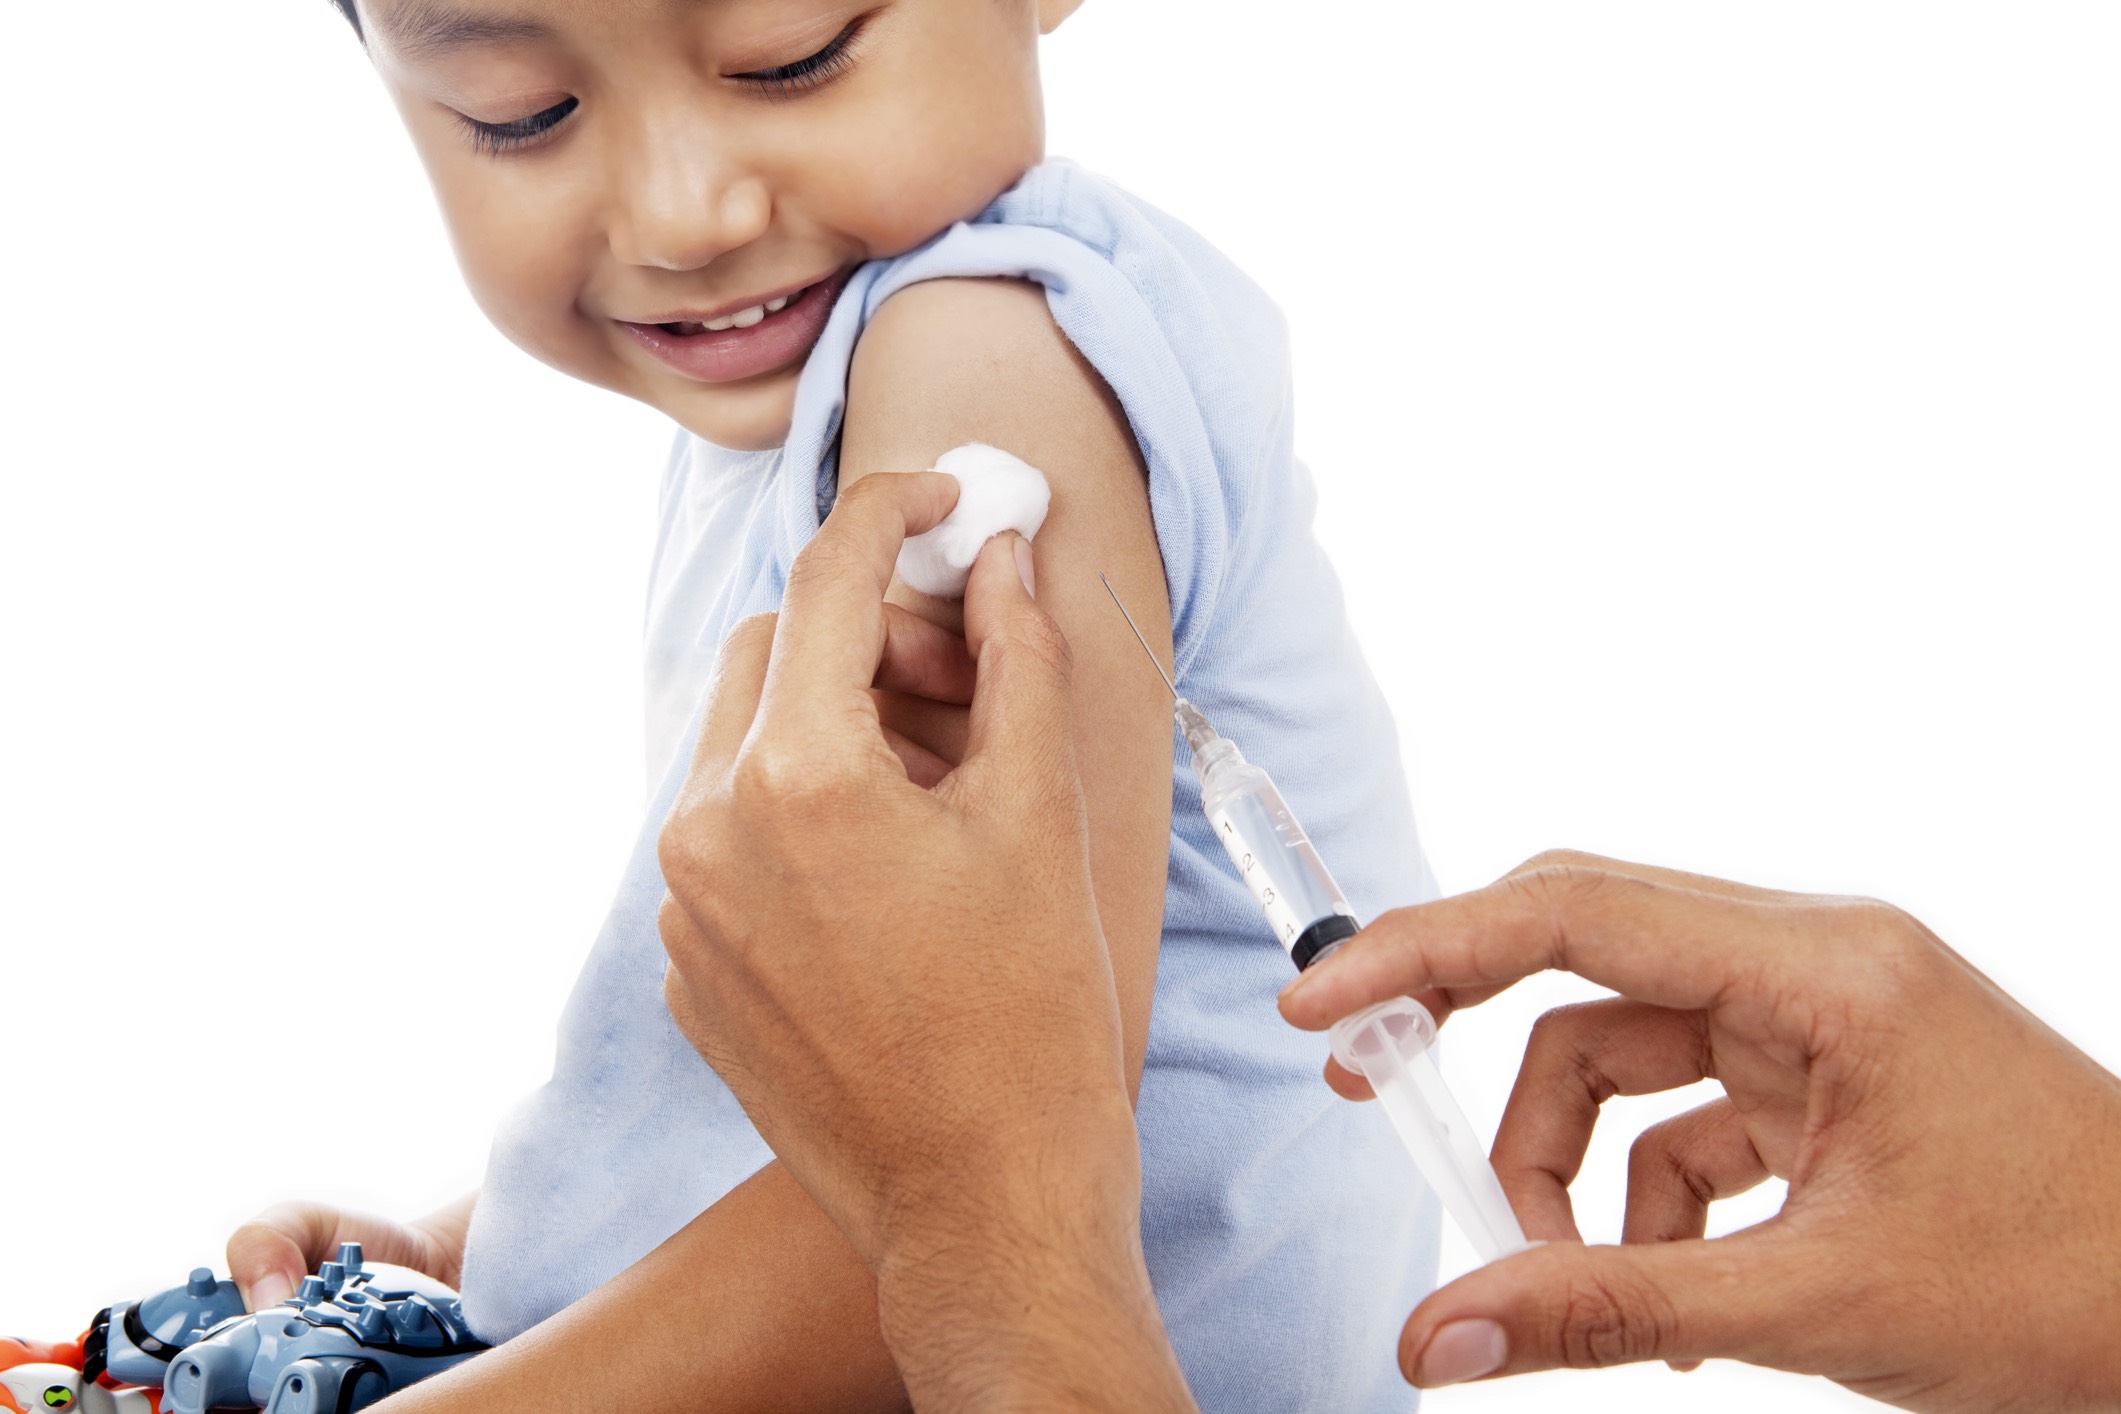 5 Reasons to Get Kids Vaccinated